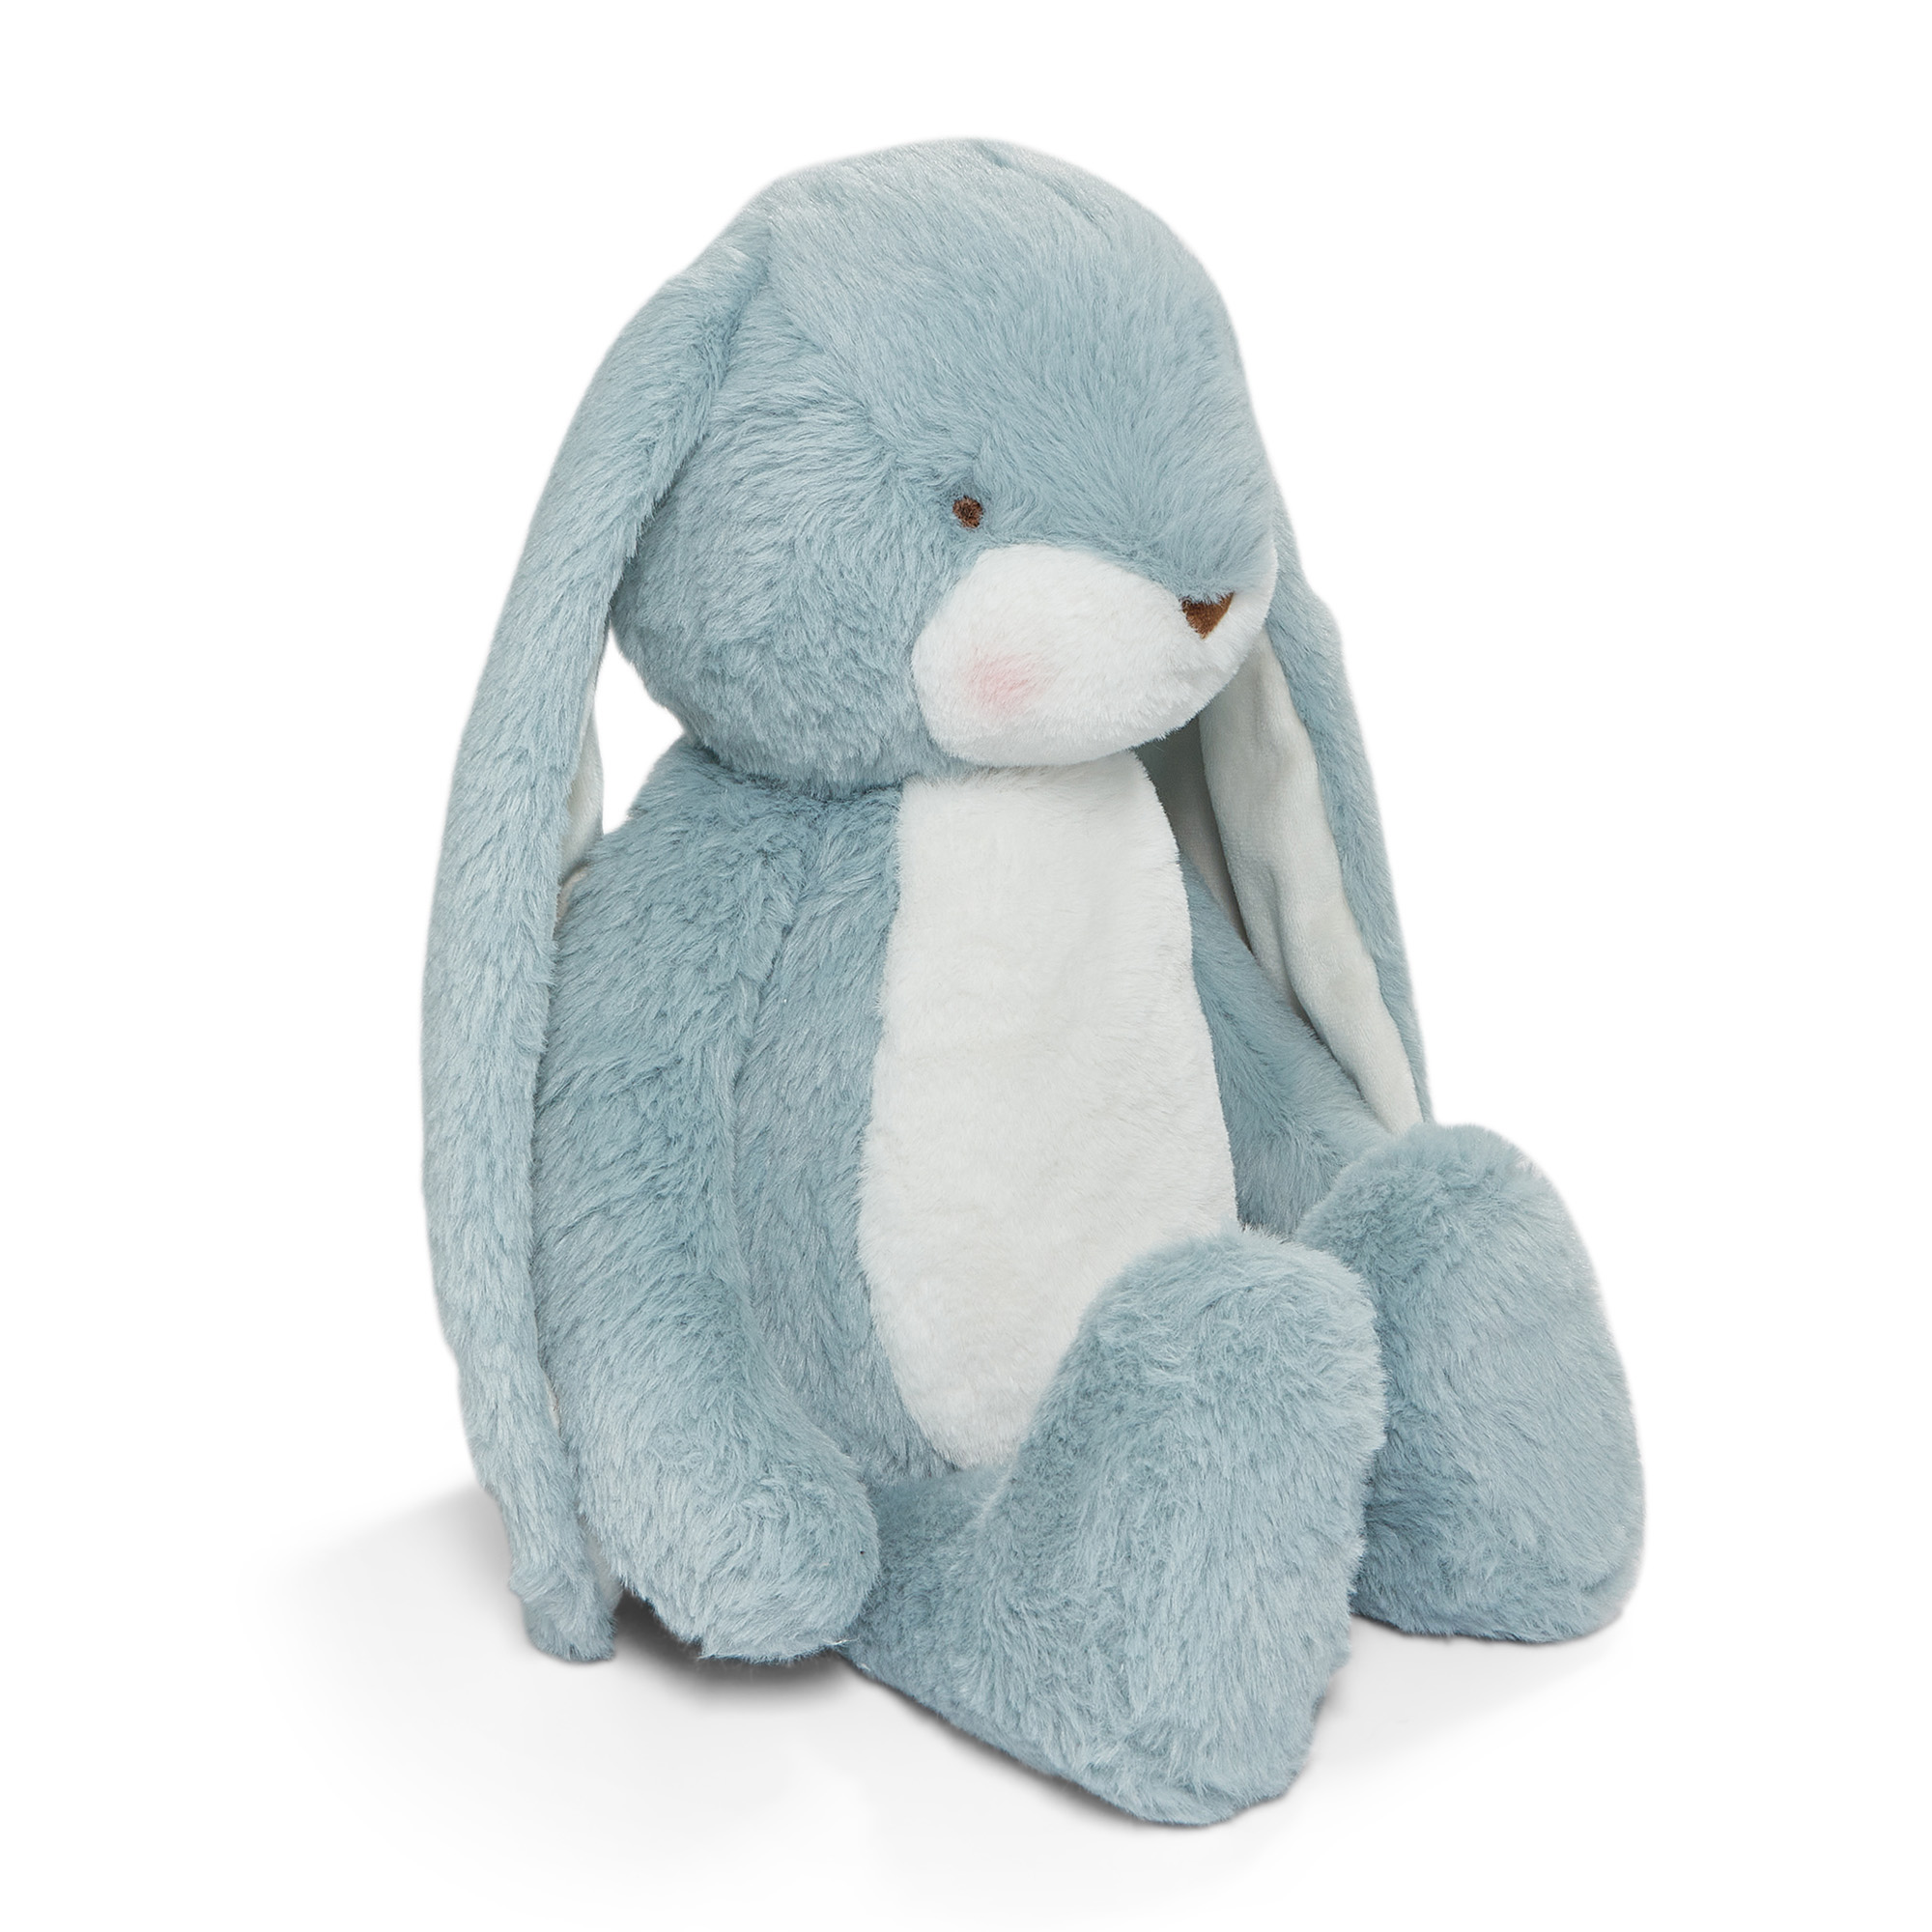 Peluche big nibble floppy stormy blue 50cm - Bunnies By The Bay